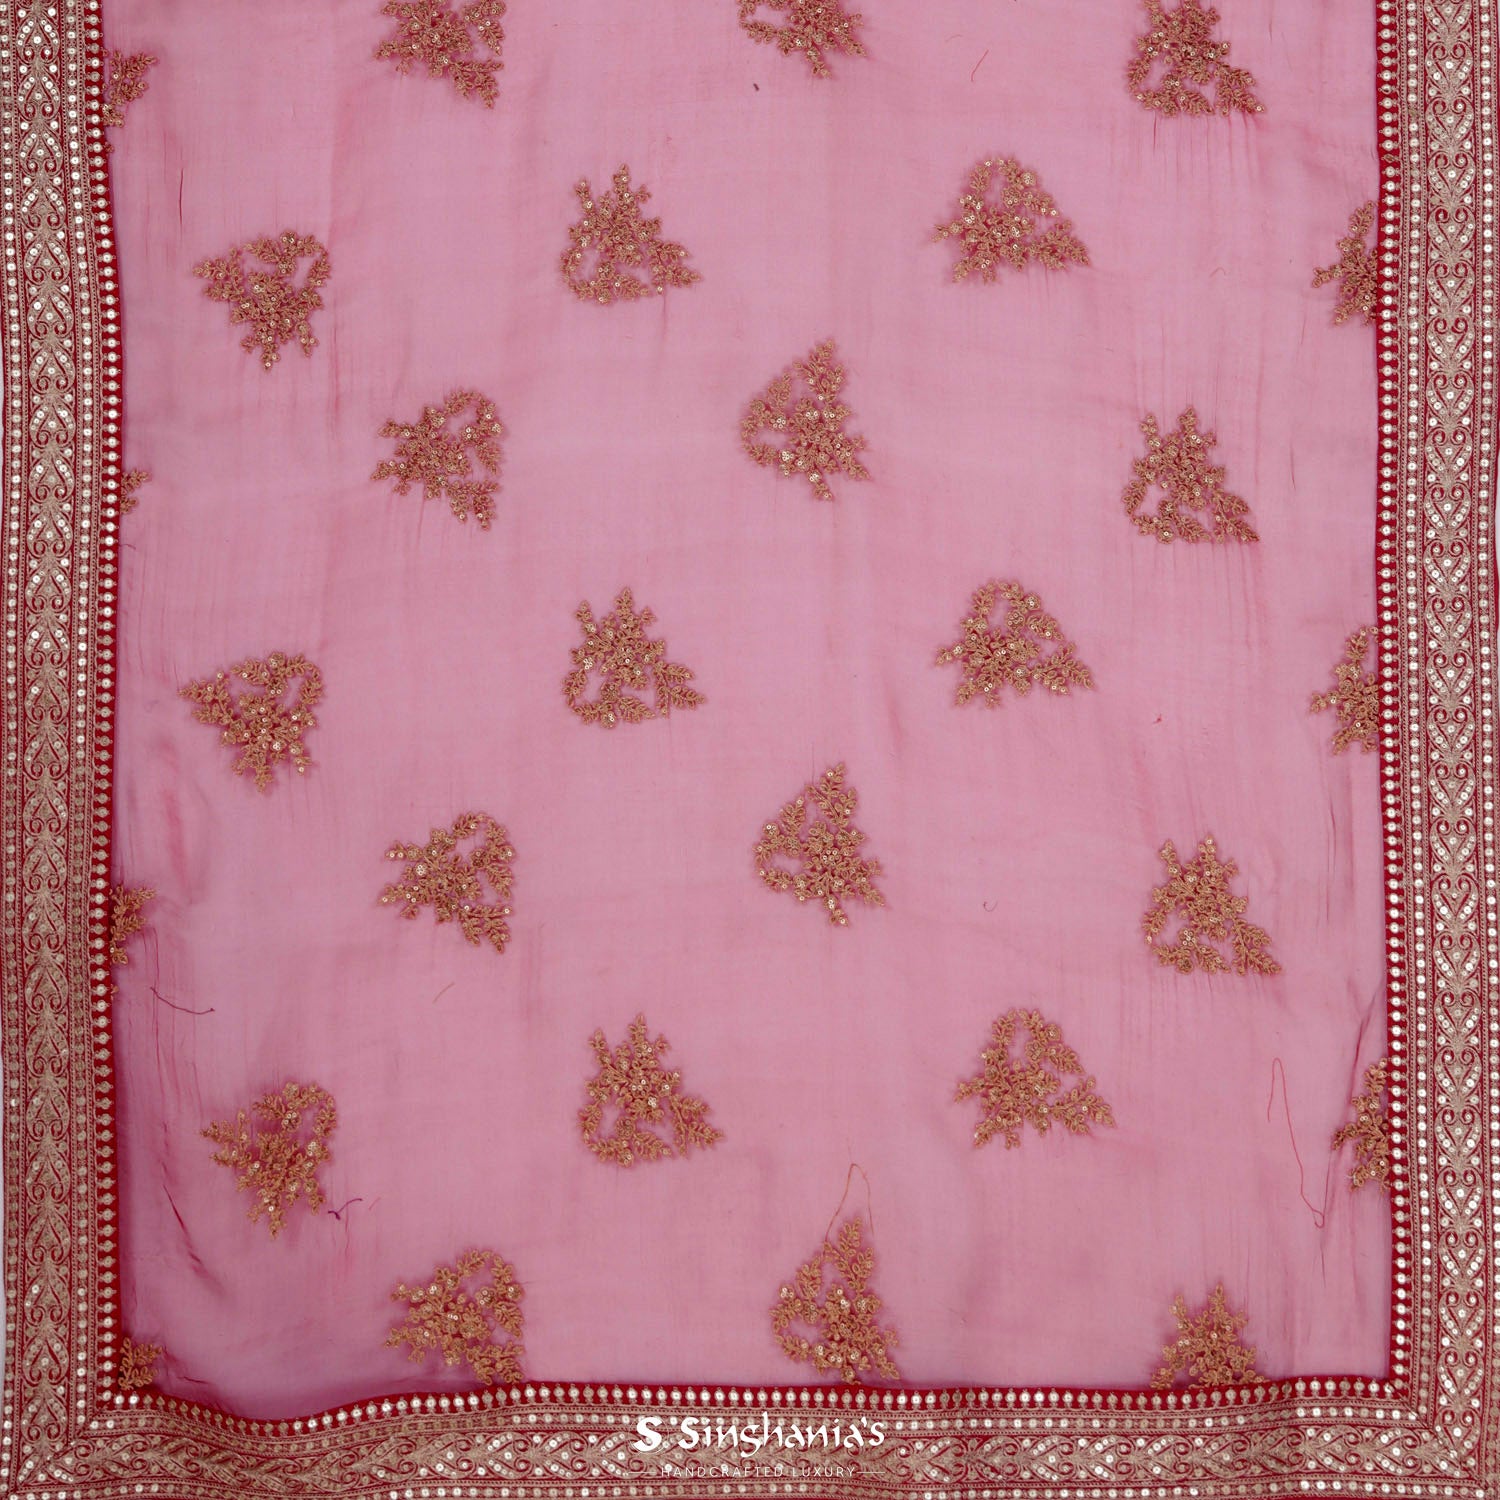 Penn Red Organza Saree With Floral Butti Pattern